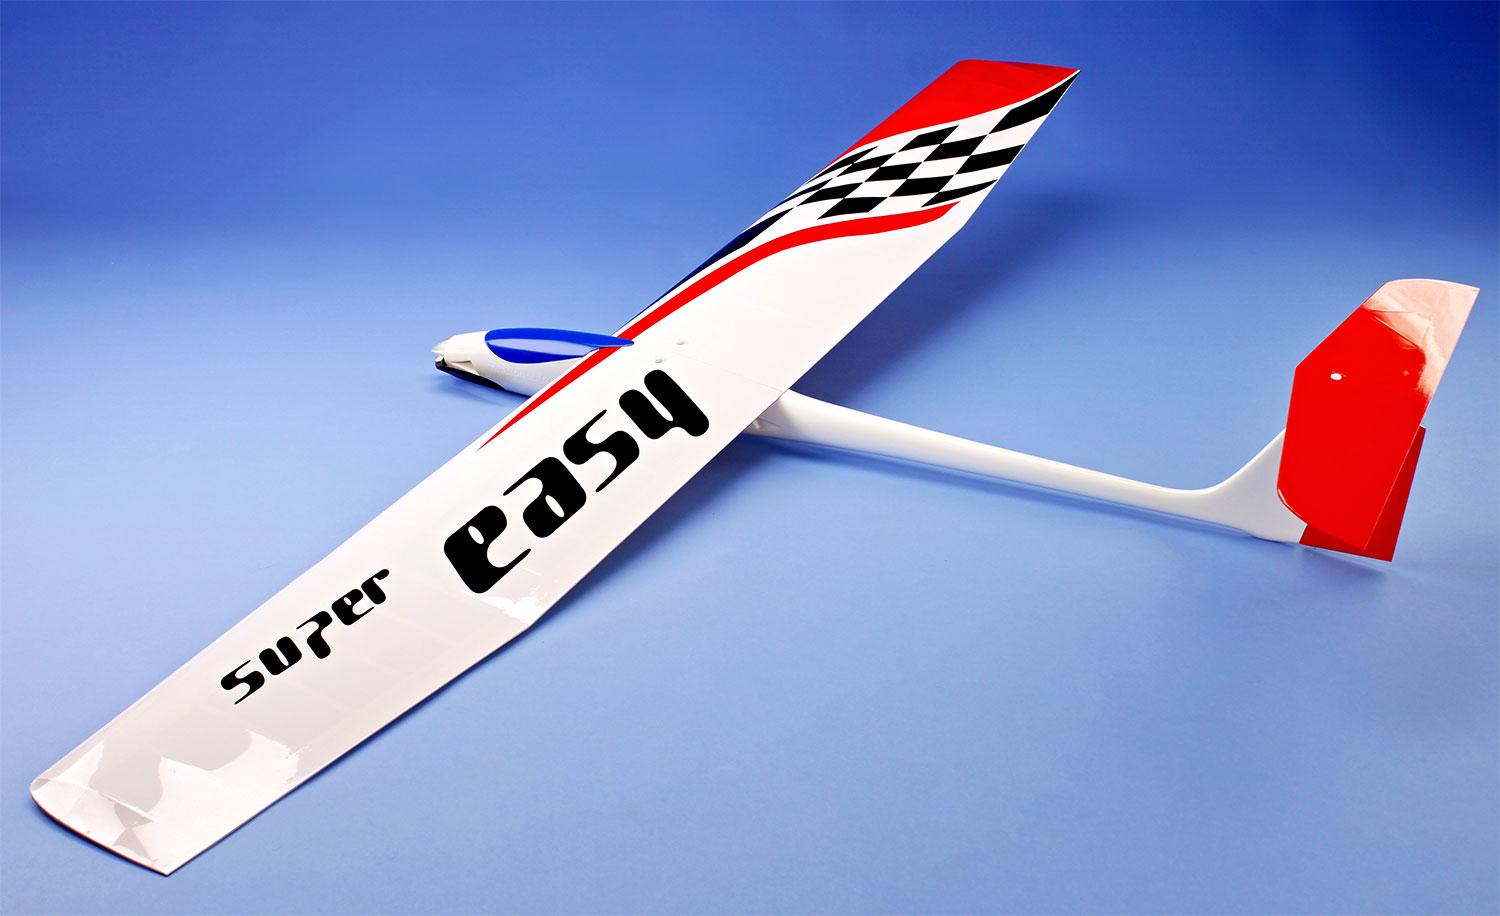 Esprit Rc Planes: Upgrade Your Esprit RC Plane with These Simple Additions